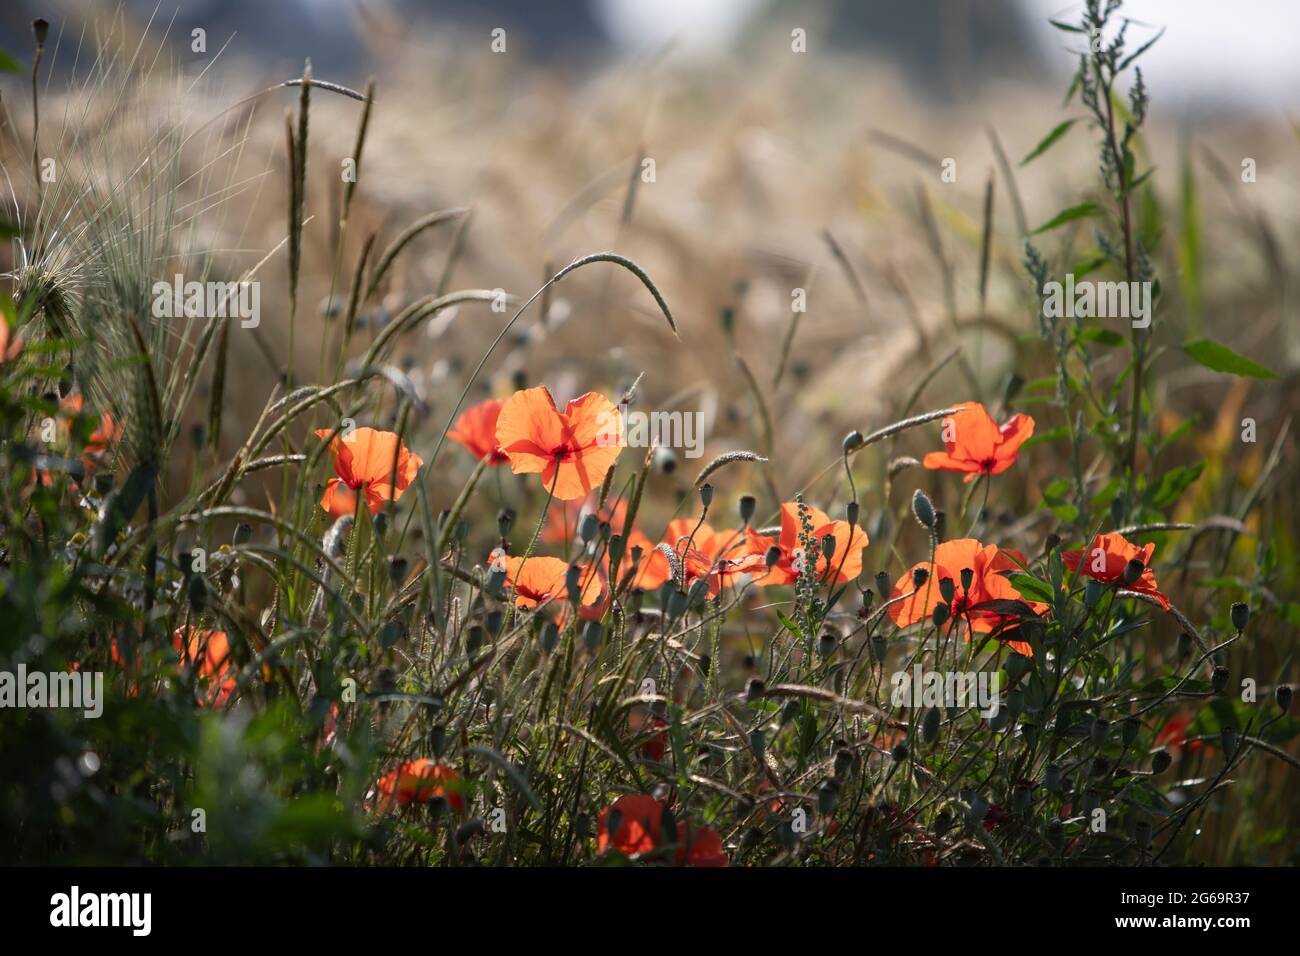 Poppy blossoms in a wheat field Stock Photo